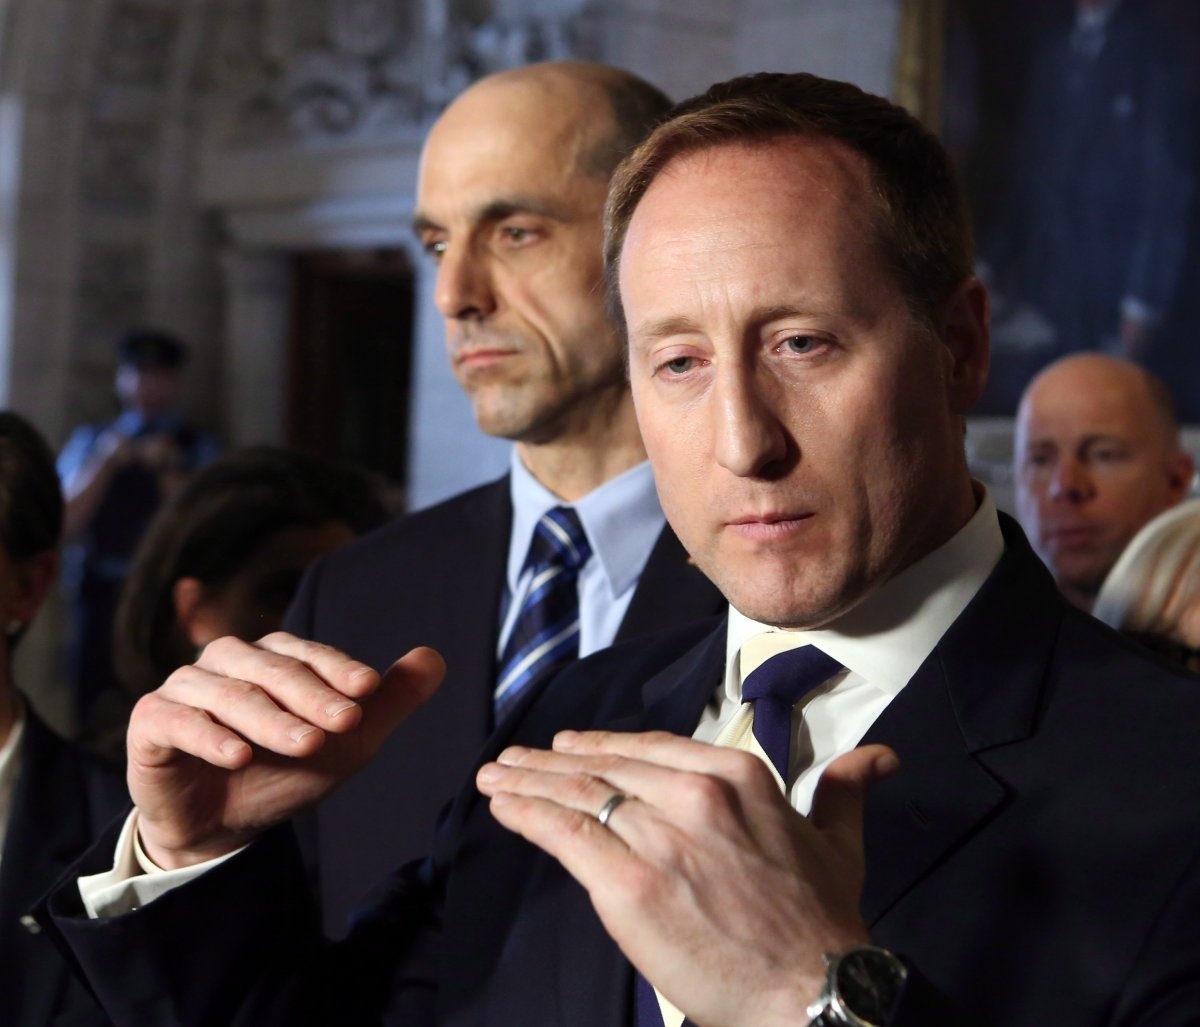 Justice Minister Peter MacKay (right) talks to reporters as Public Safety Minister Steven Blaney looks on in Ottawa, on Wednesday February 26, 2014. THE CANADIAN PRESS/Fred Chartrand.